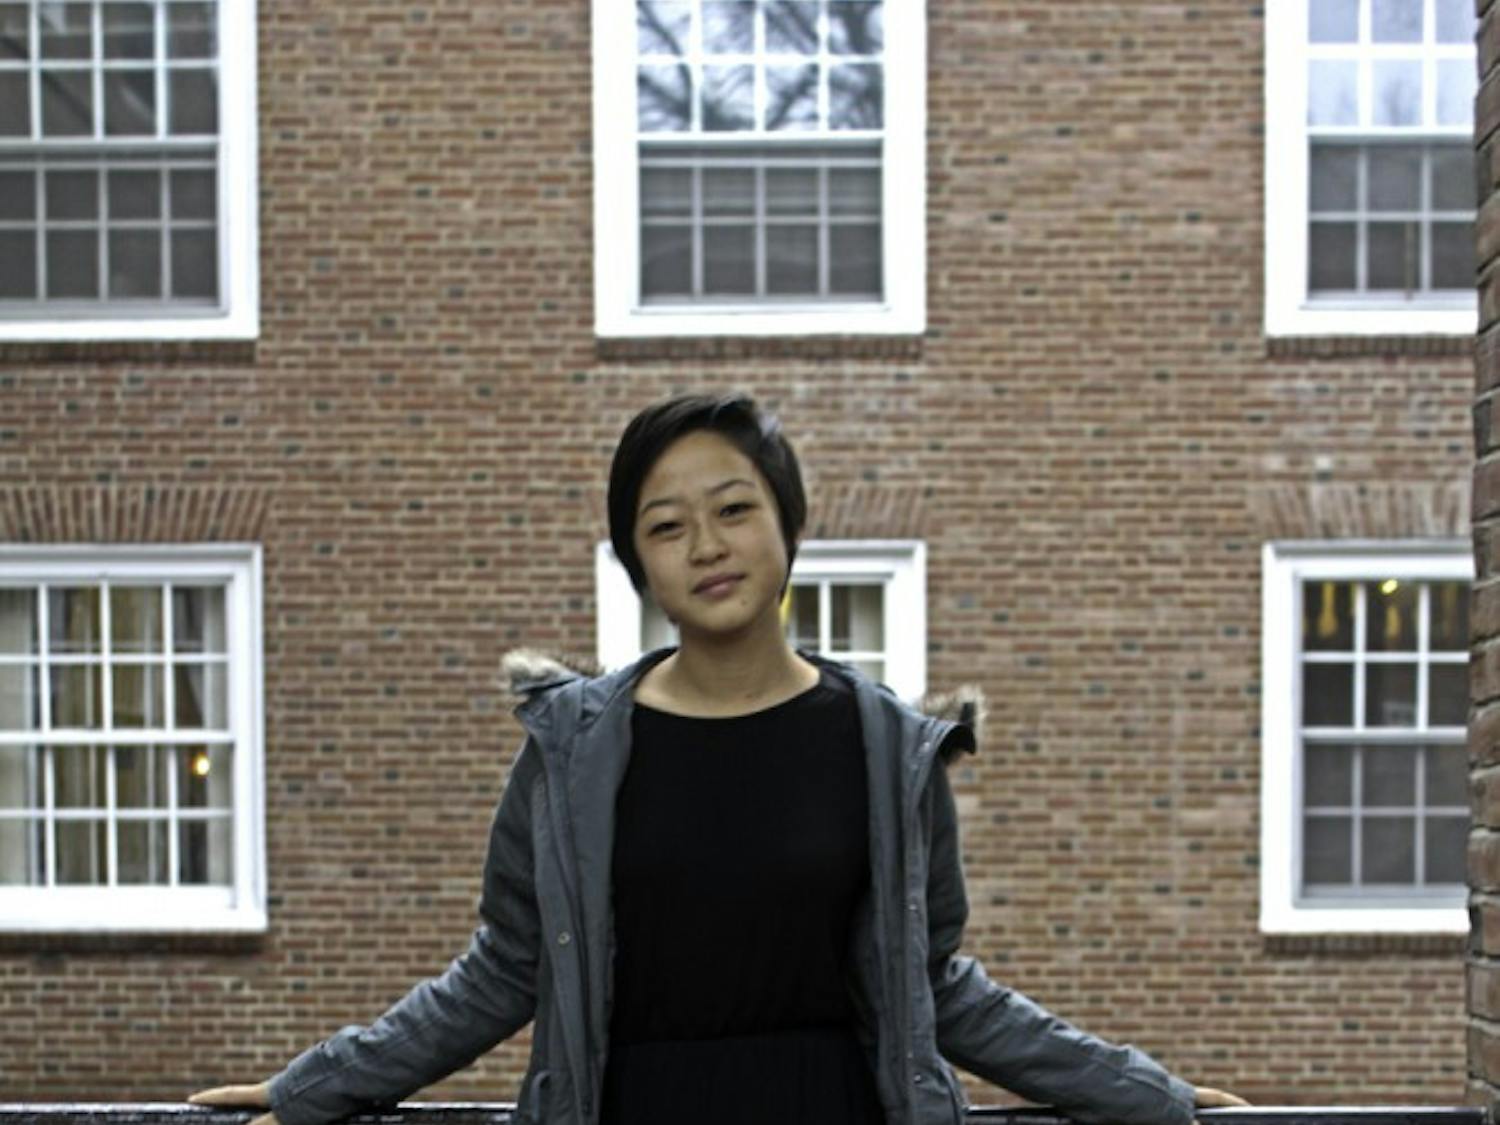 After moving all her possessions for the 10th time at Dartmouth, Connie Gong ’15 reflects on her minimalist attitude and the things that really matter.